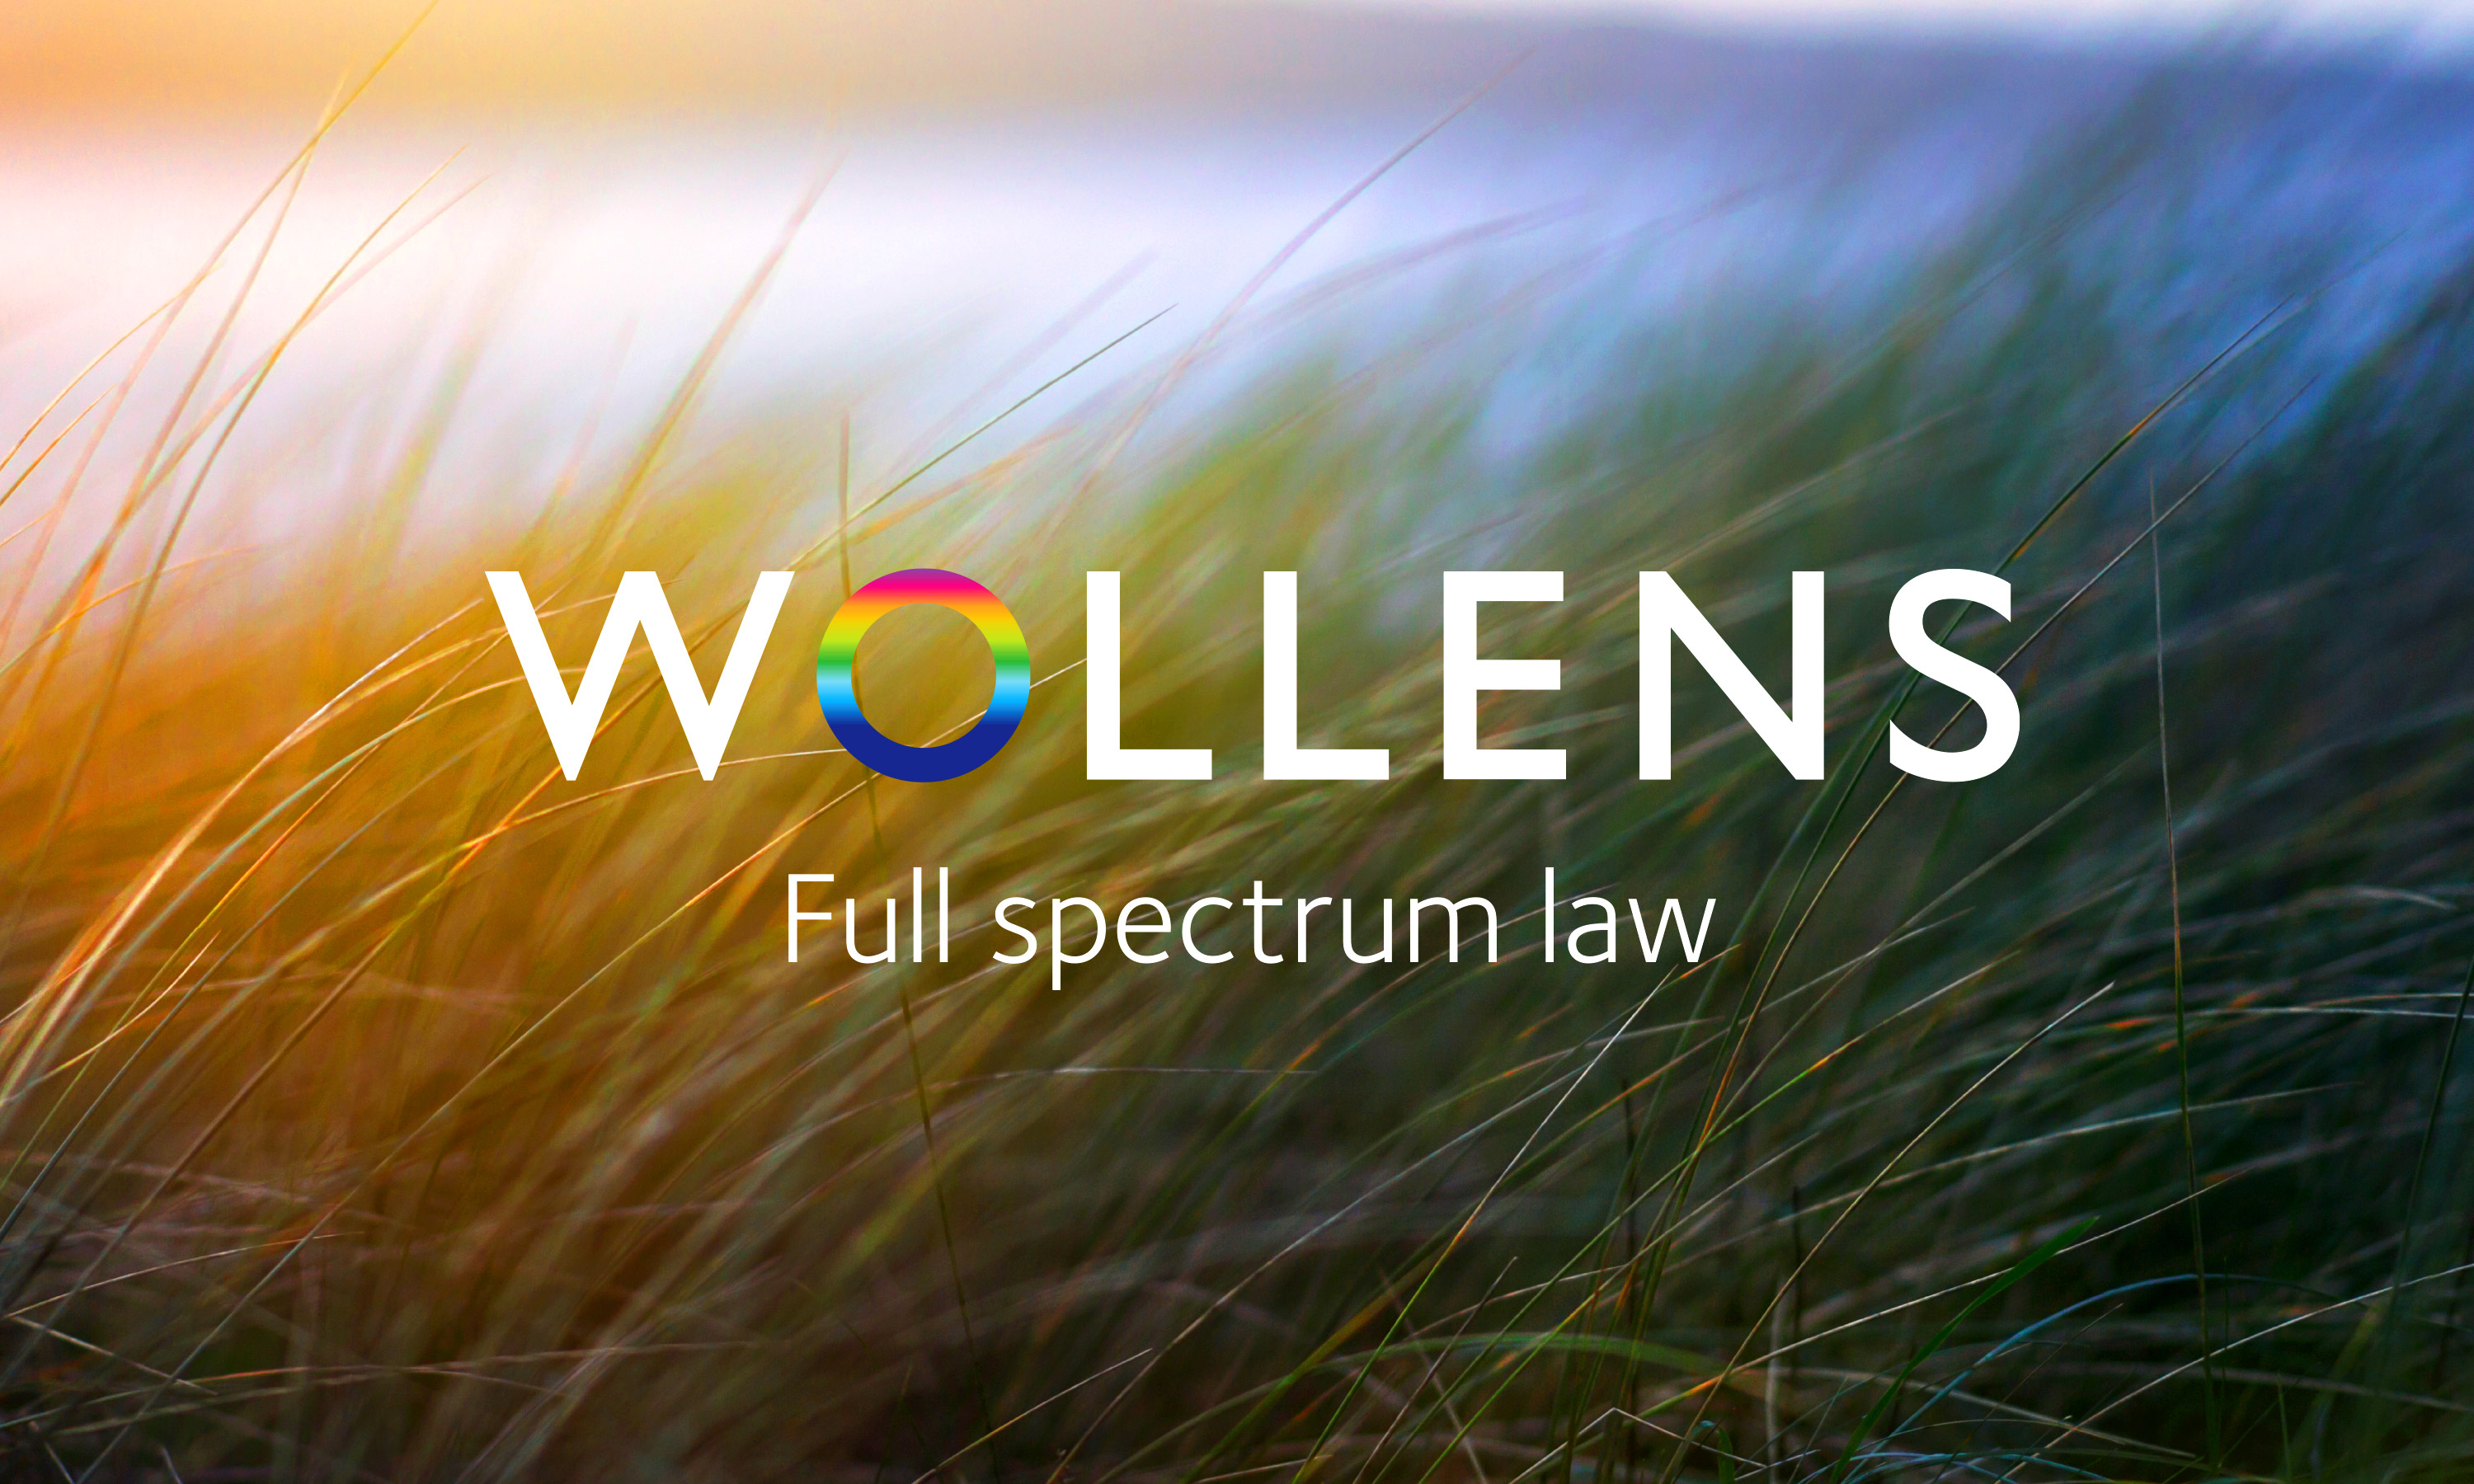 Branding by Neon Wollens Solicitors Devon, new Wollens brand mark over image of dune grasses designed by Dana Robertson